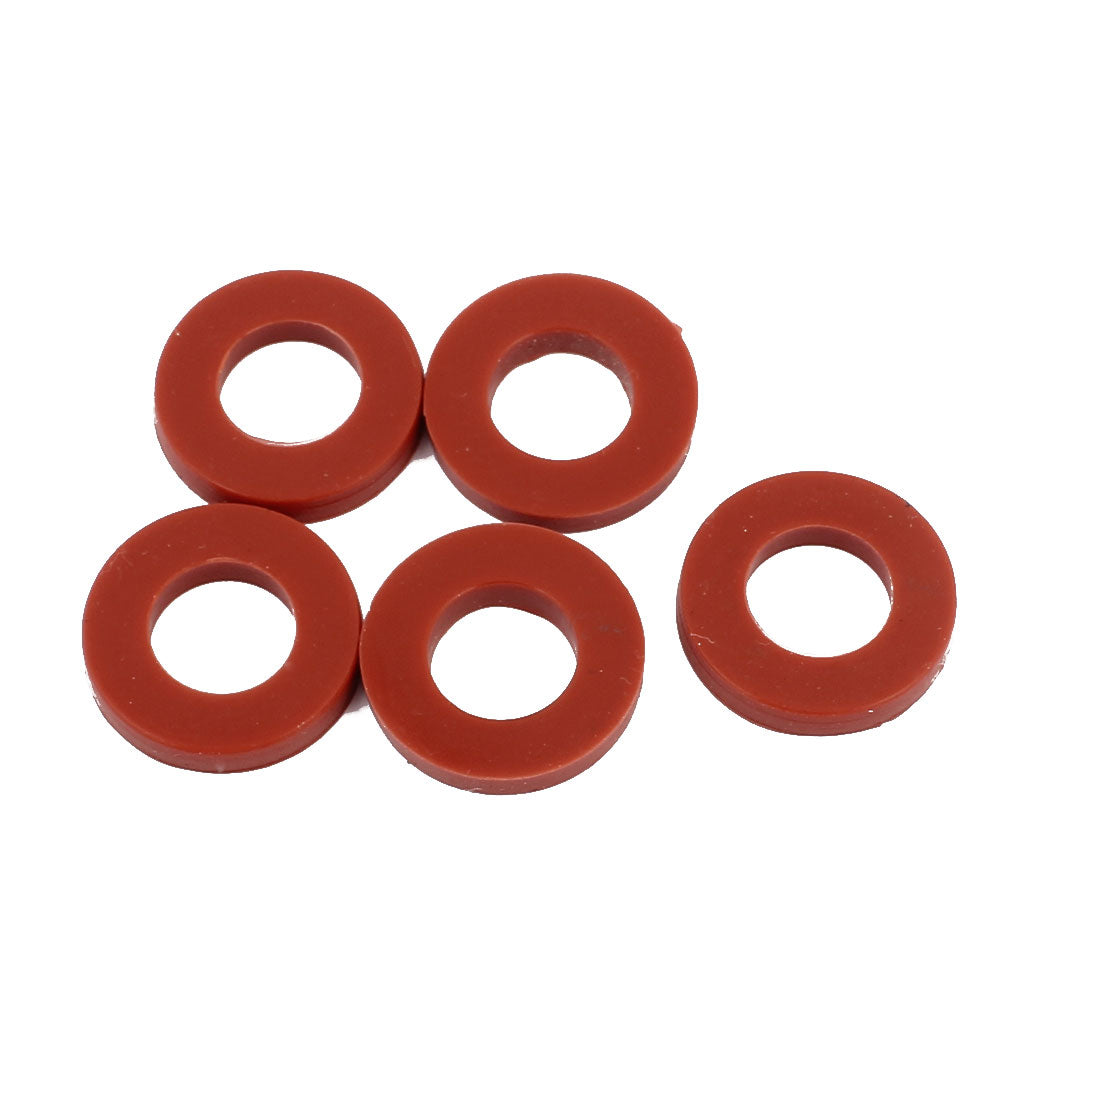 uxcell Uxcell 5pcs 19mm x 10mm x 3mm Silicone O Ring Seal Gaskets Red for Pipe Tube Hose